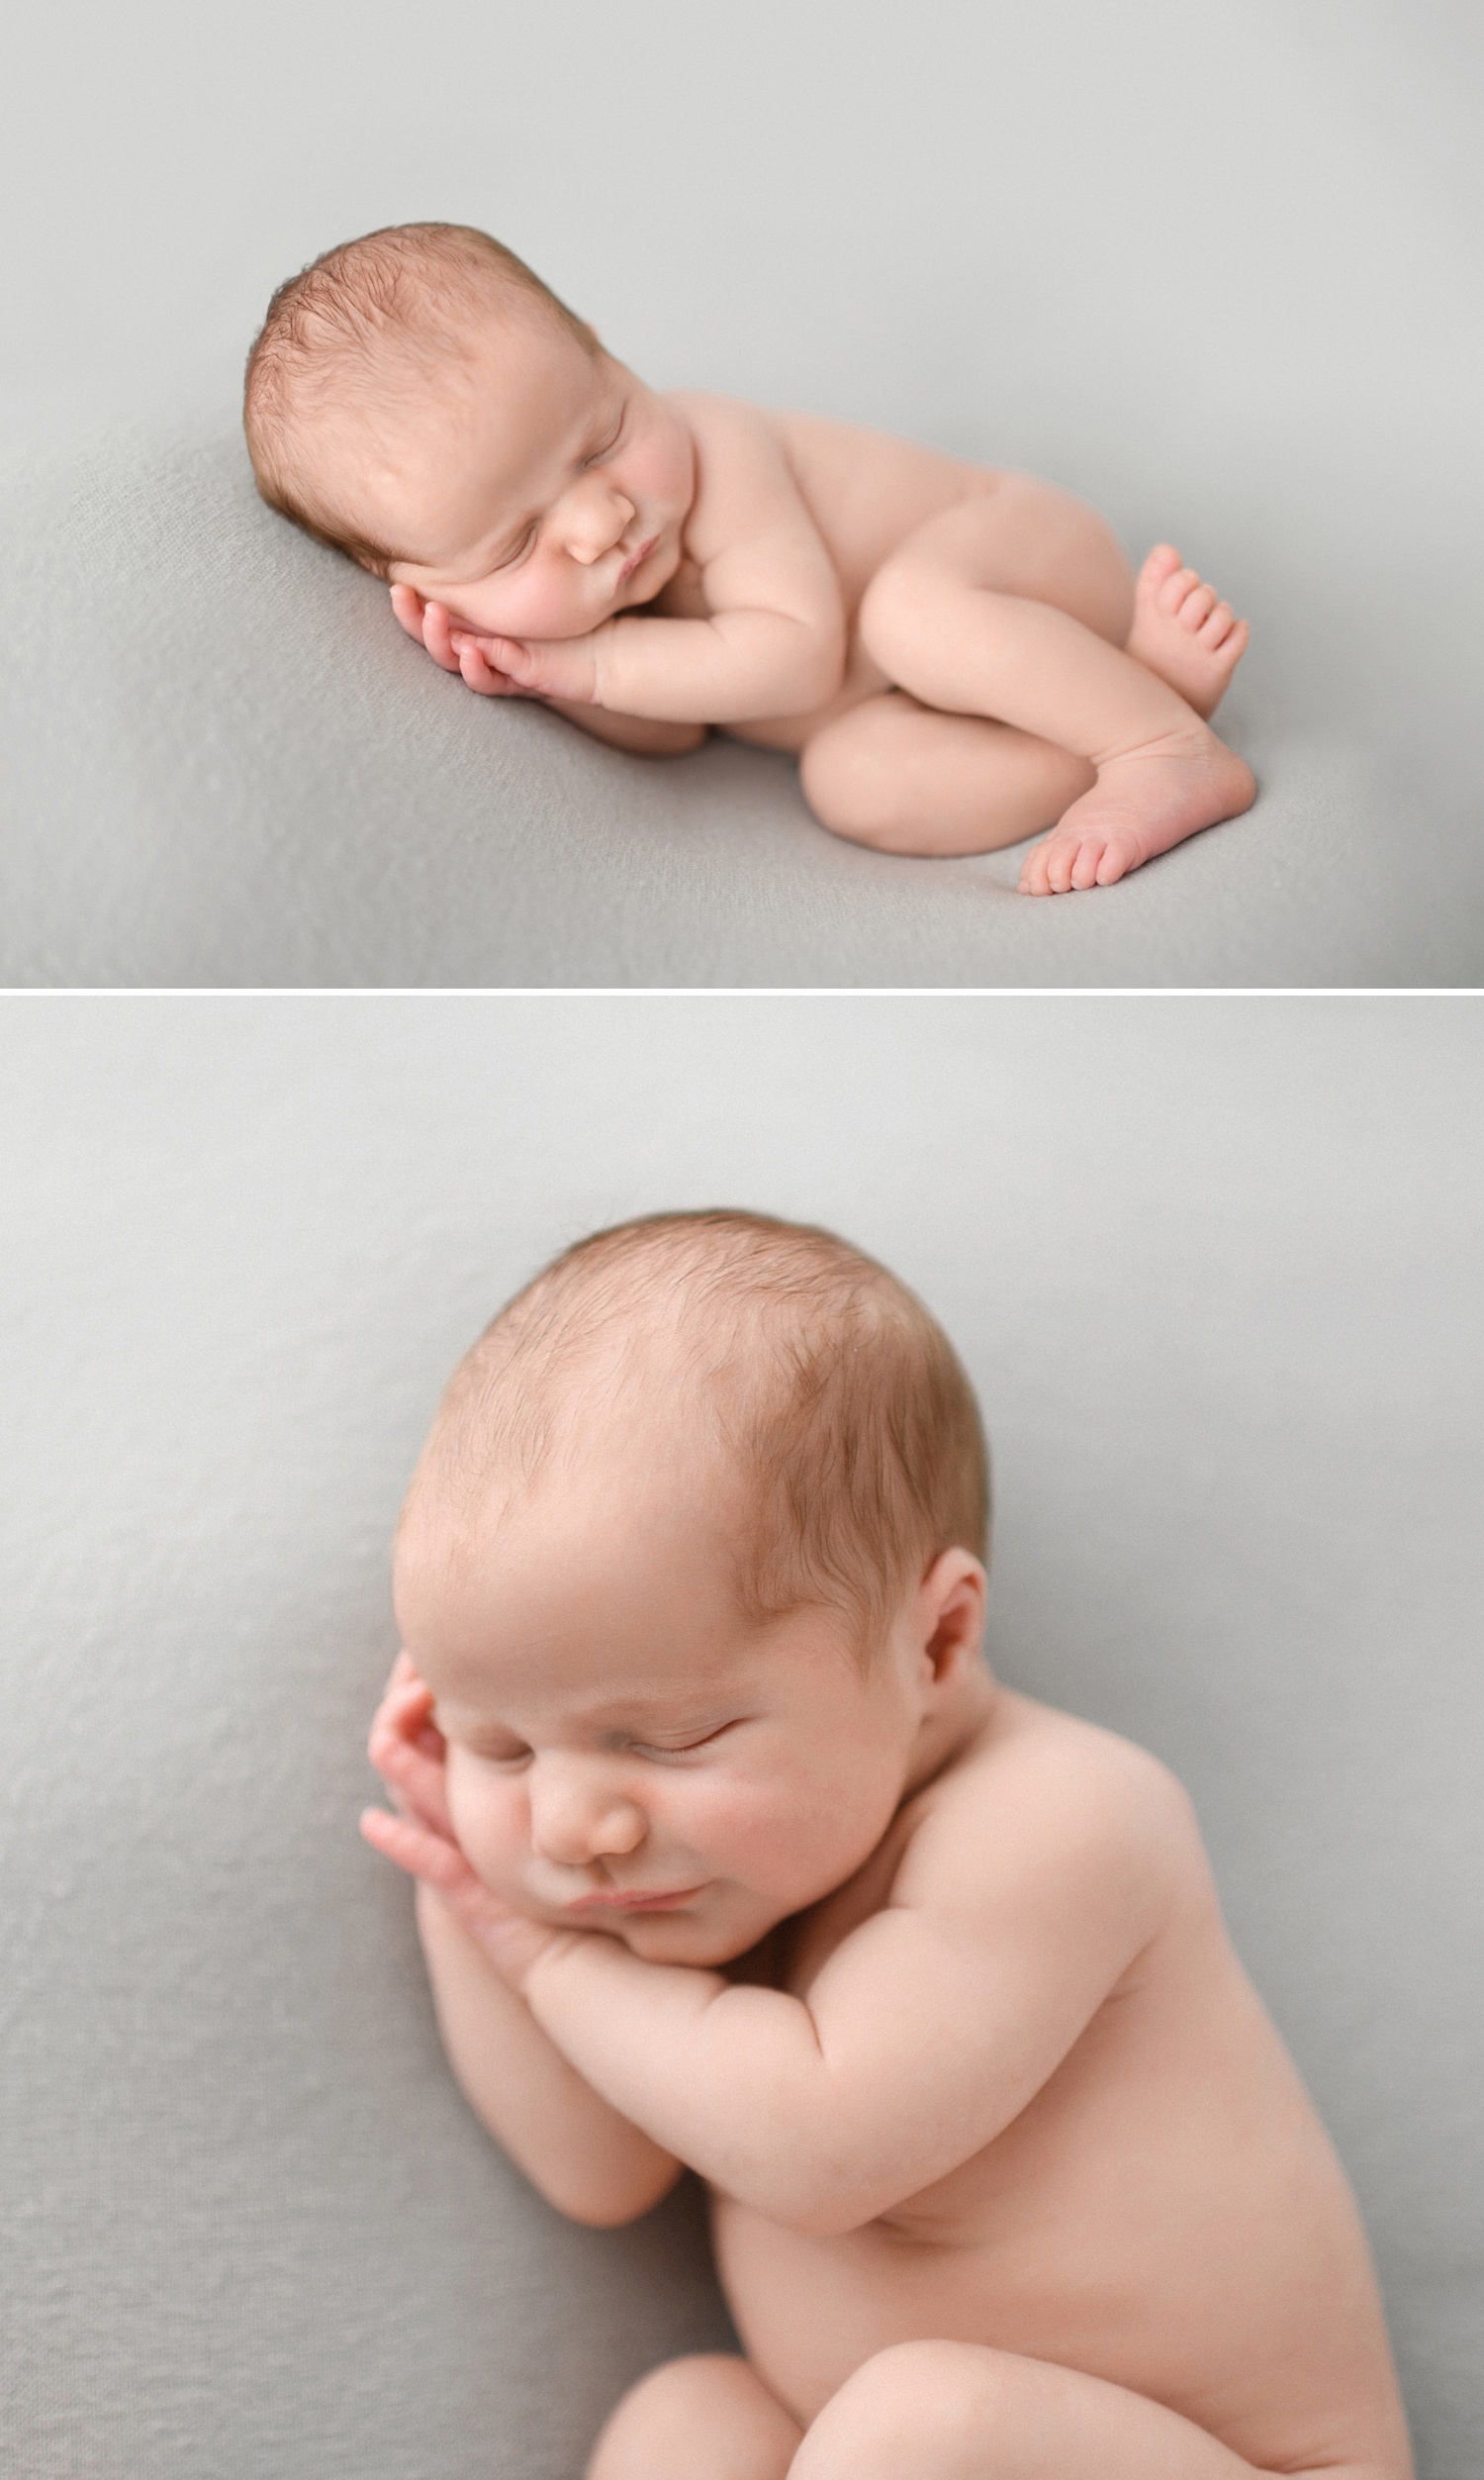 is studio or natural light best for photographing newborns